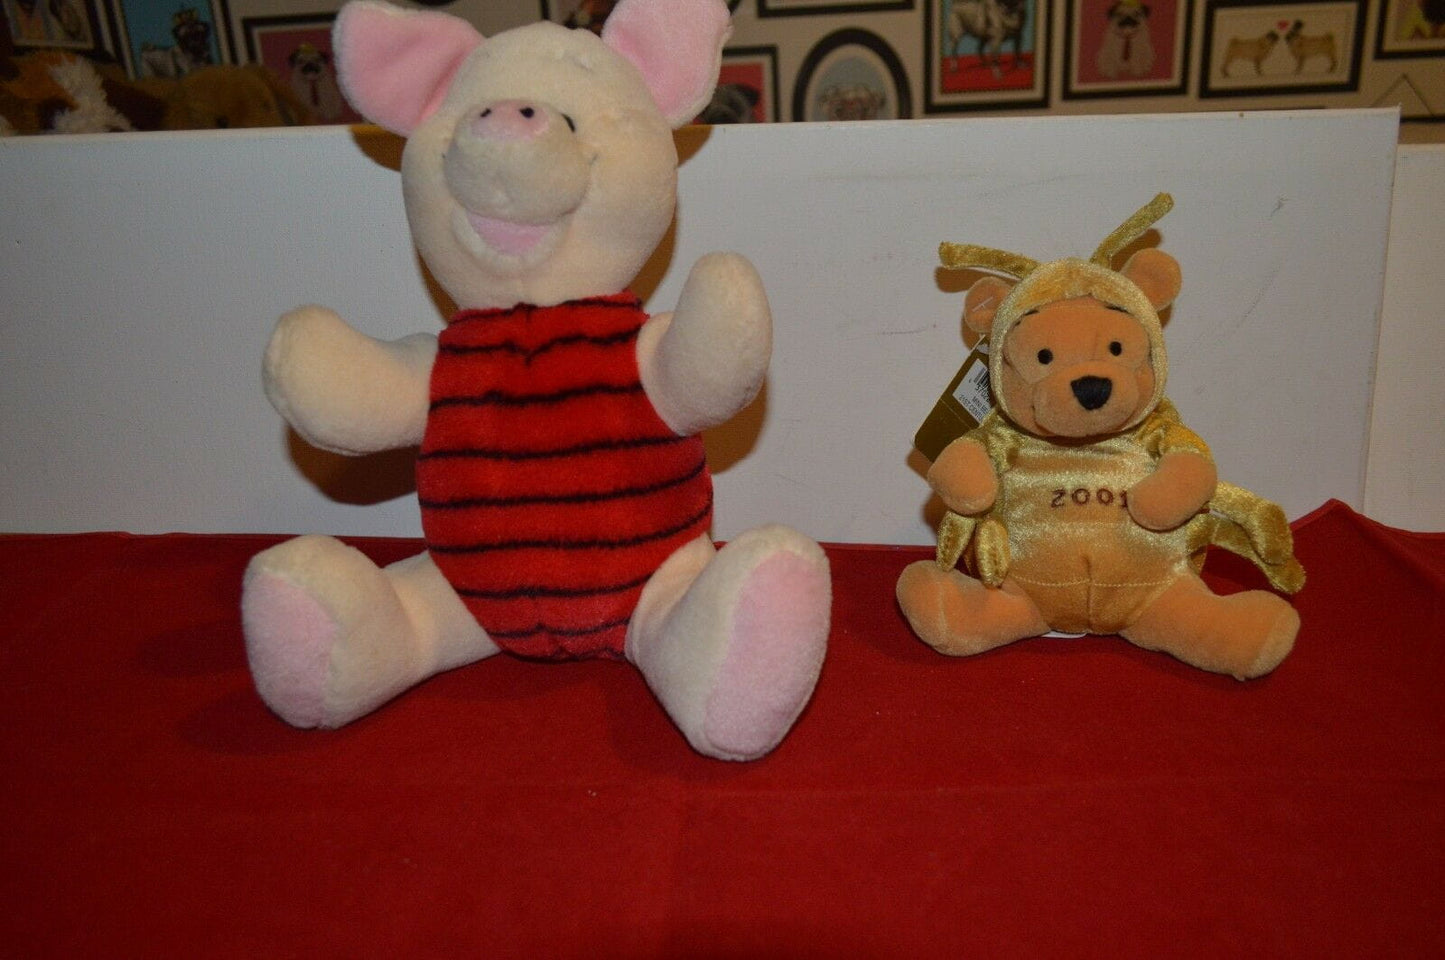 DISNEY WINNIE THE POOH AND A PIGLET SOFT TOYS(PREVIOUSLY OWNED) - TMD167207